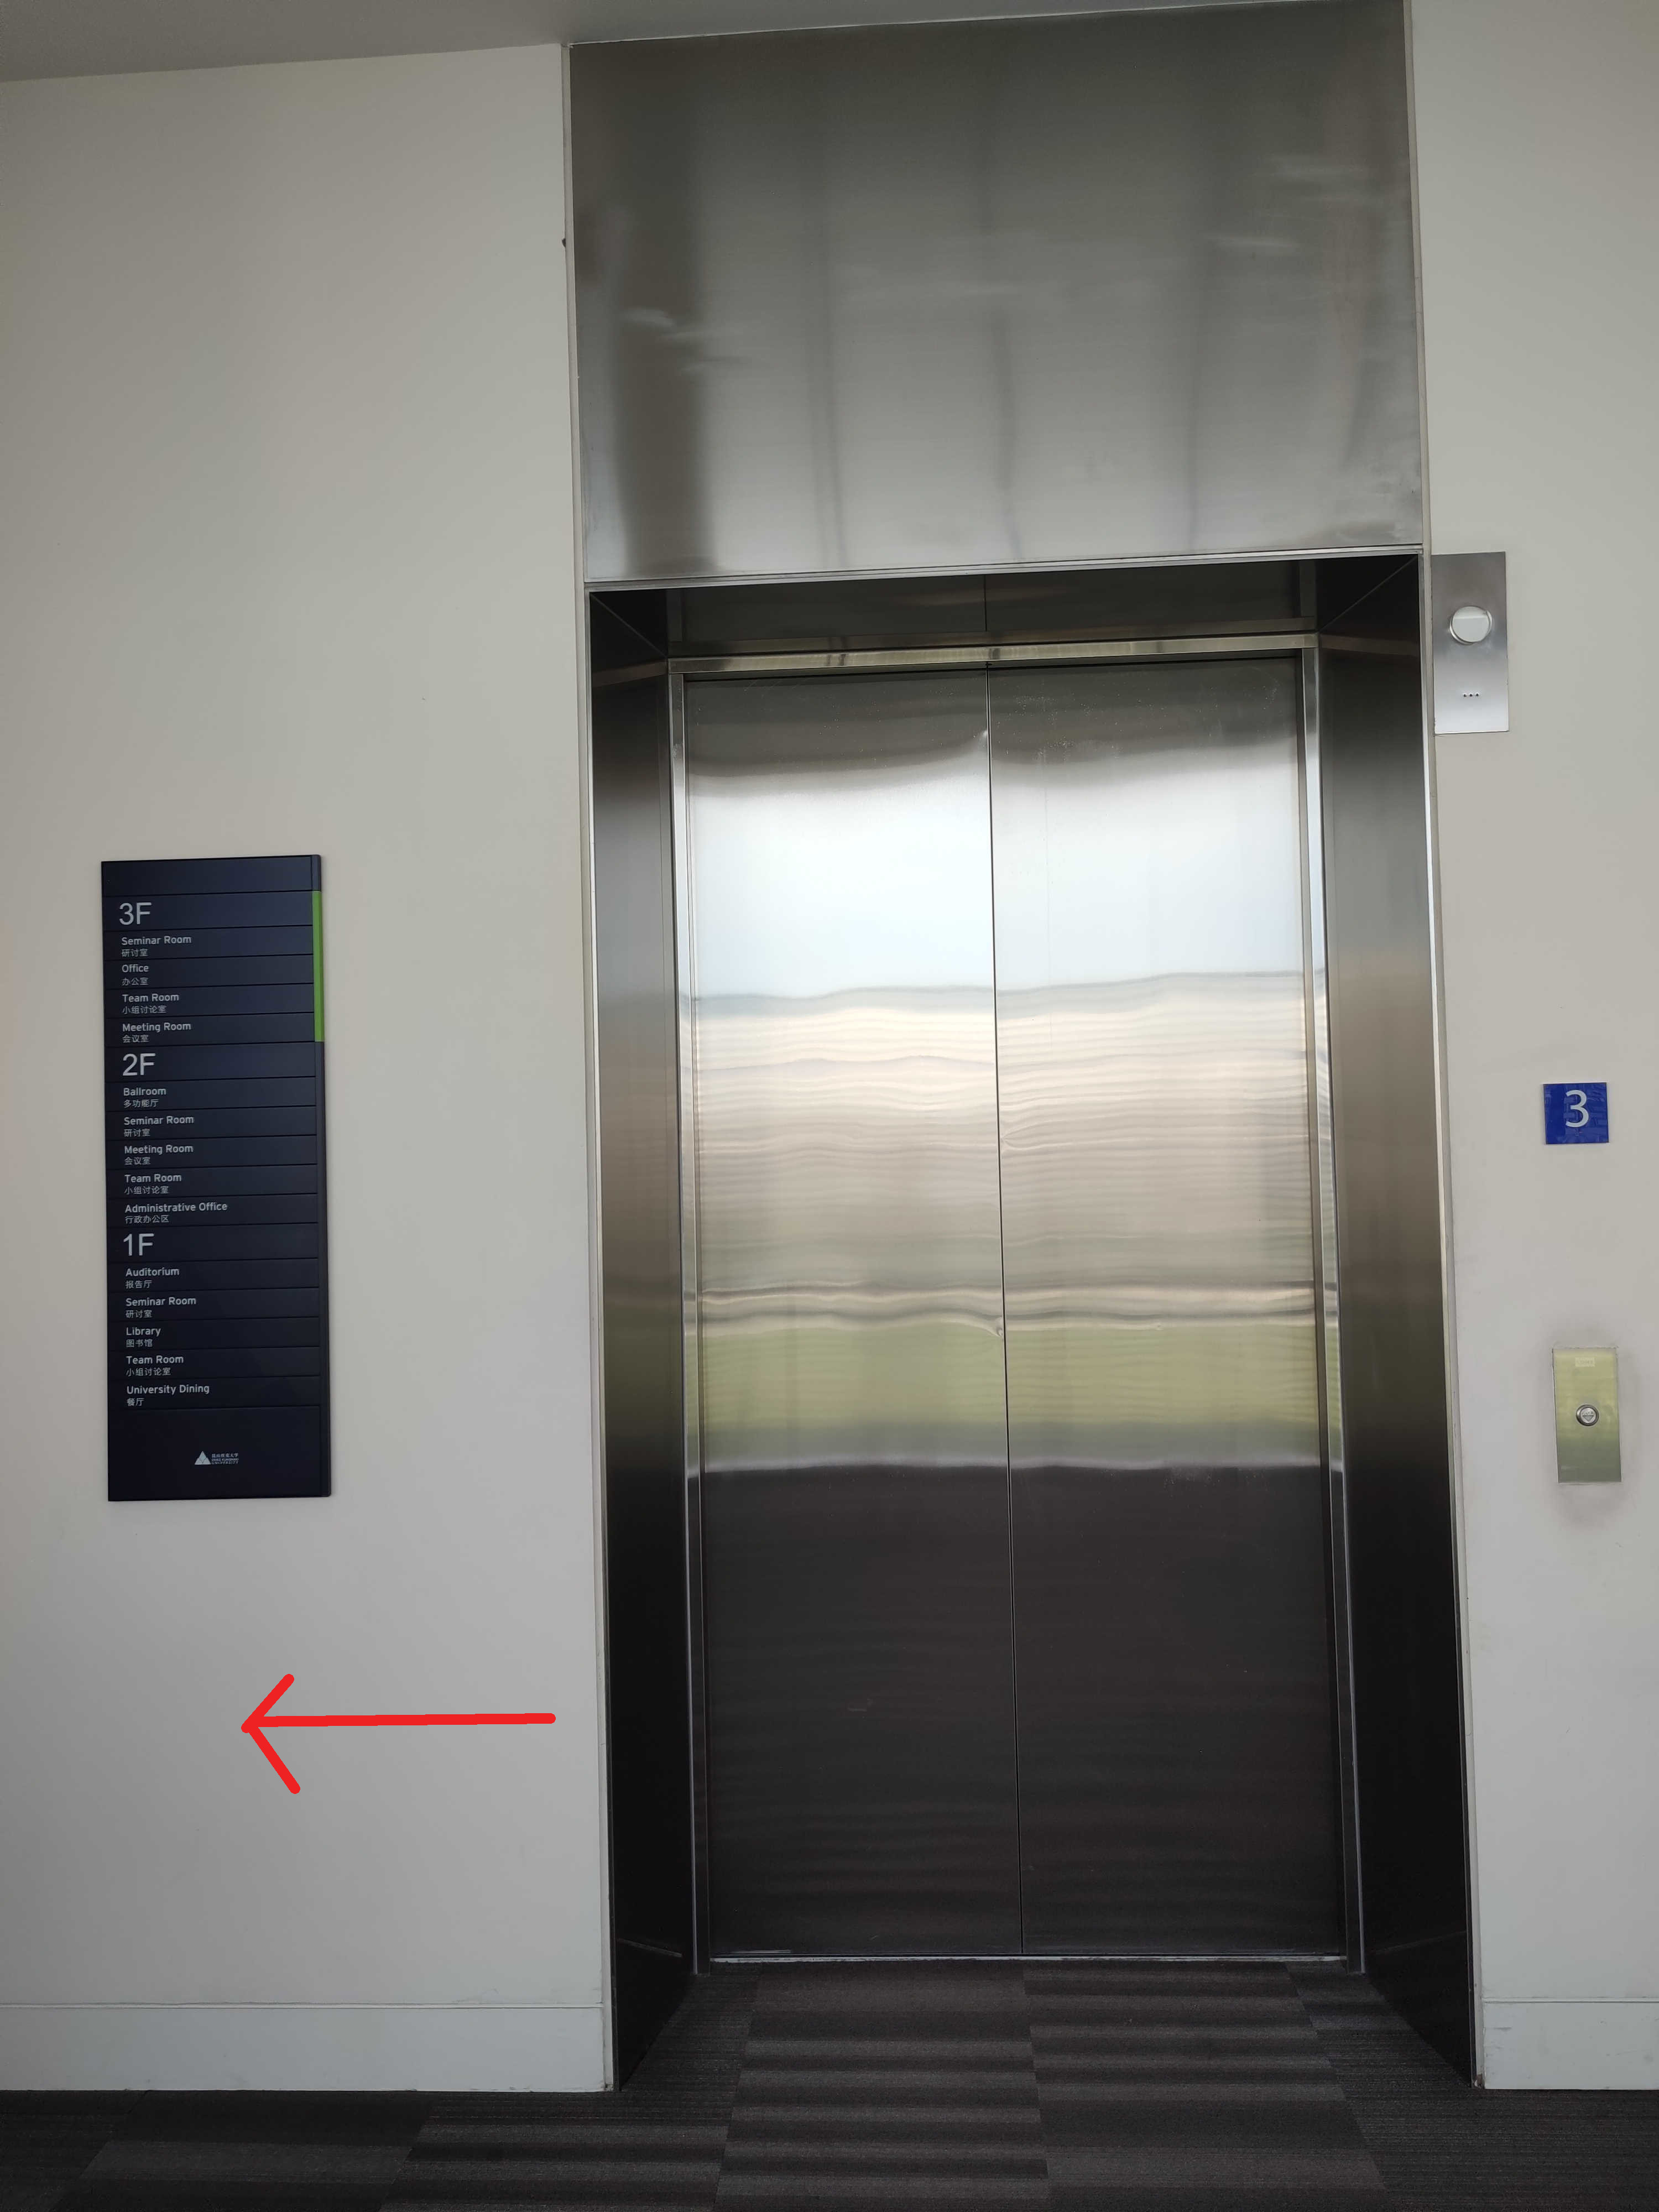 Turn right after you get off the elevator.